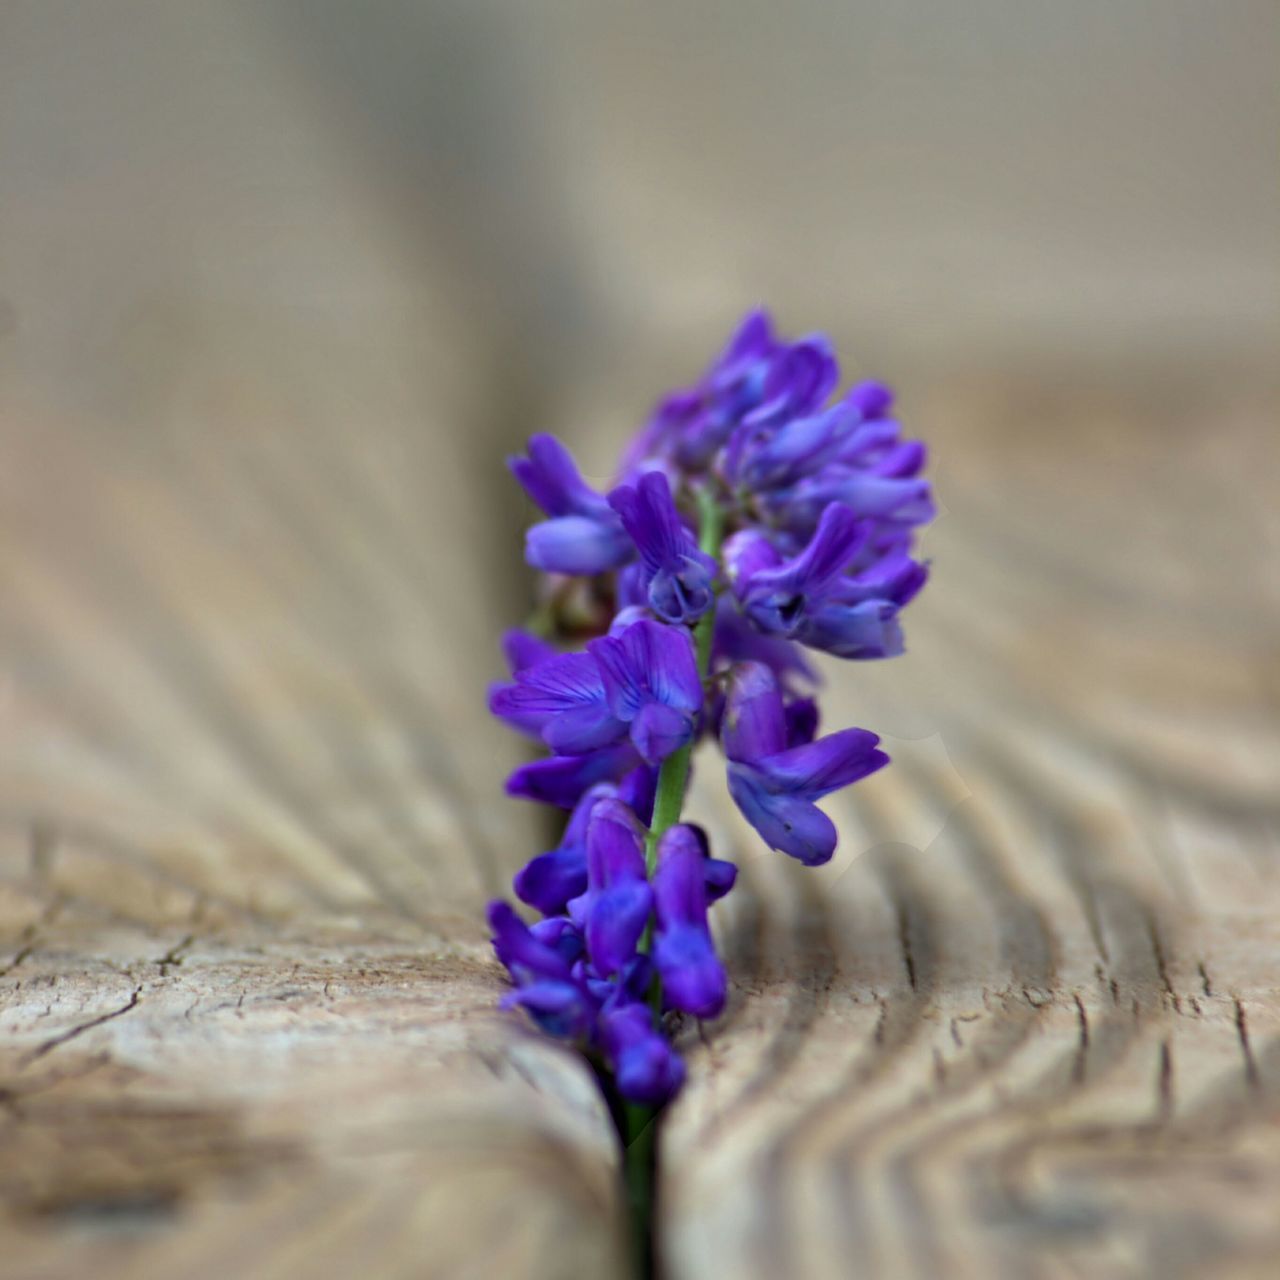 purple, flower, selective focus, close-up, fragility, petal, focus on foreground, freshness, beauty in nature, blue, nature, flower head, growth, single flower, no people, outdoors, day, plant, high angle view, softness